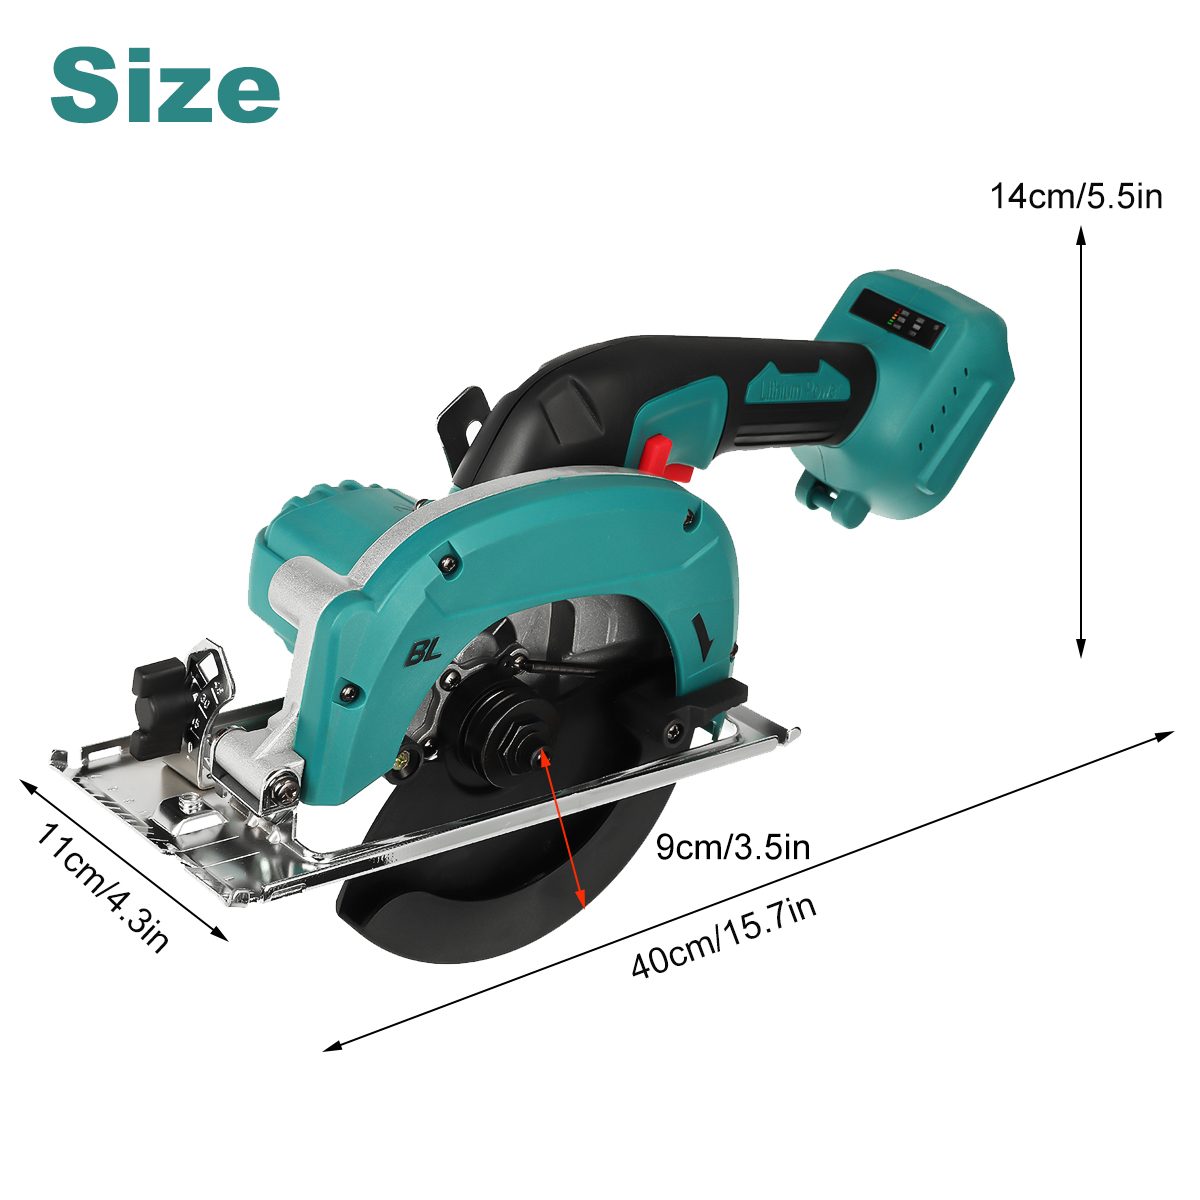 132150mm-Cordless-Electric-Circular-Saw-Curved-Cutting-Adjustable-Cut-Off-Saw-For-Woodworking-Fit-Ma-1924966-7